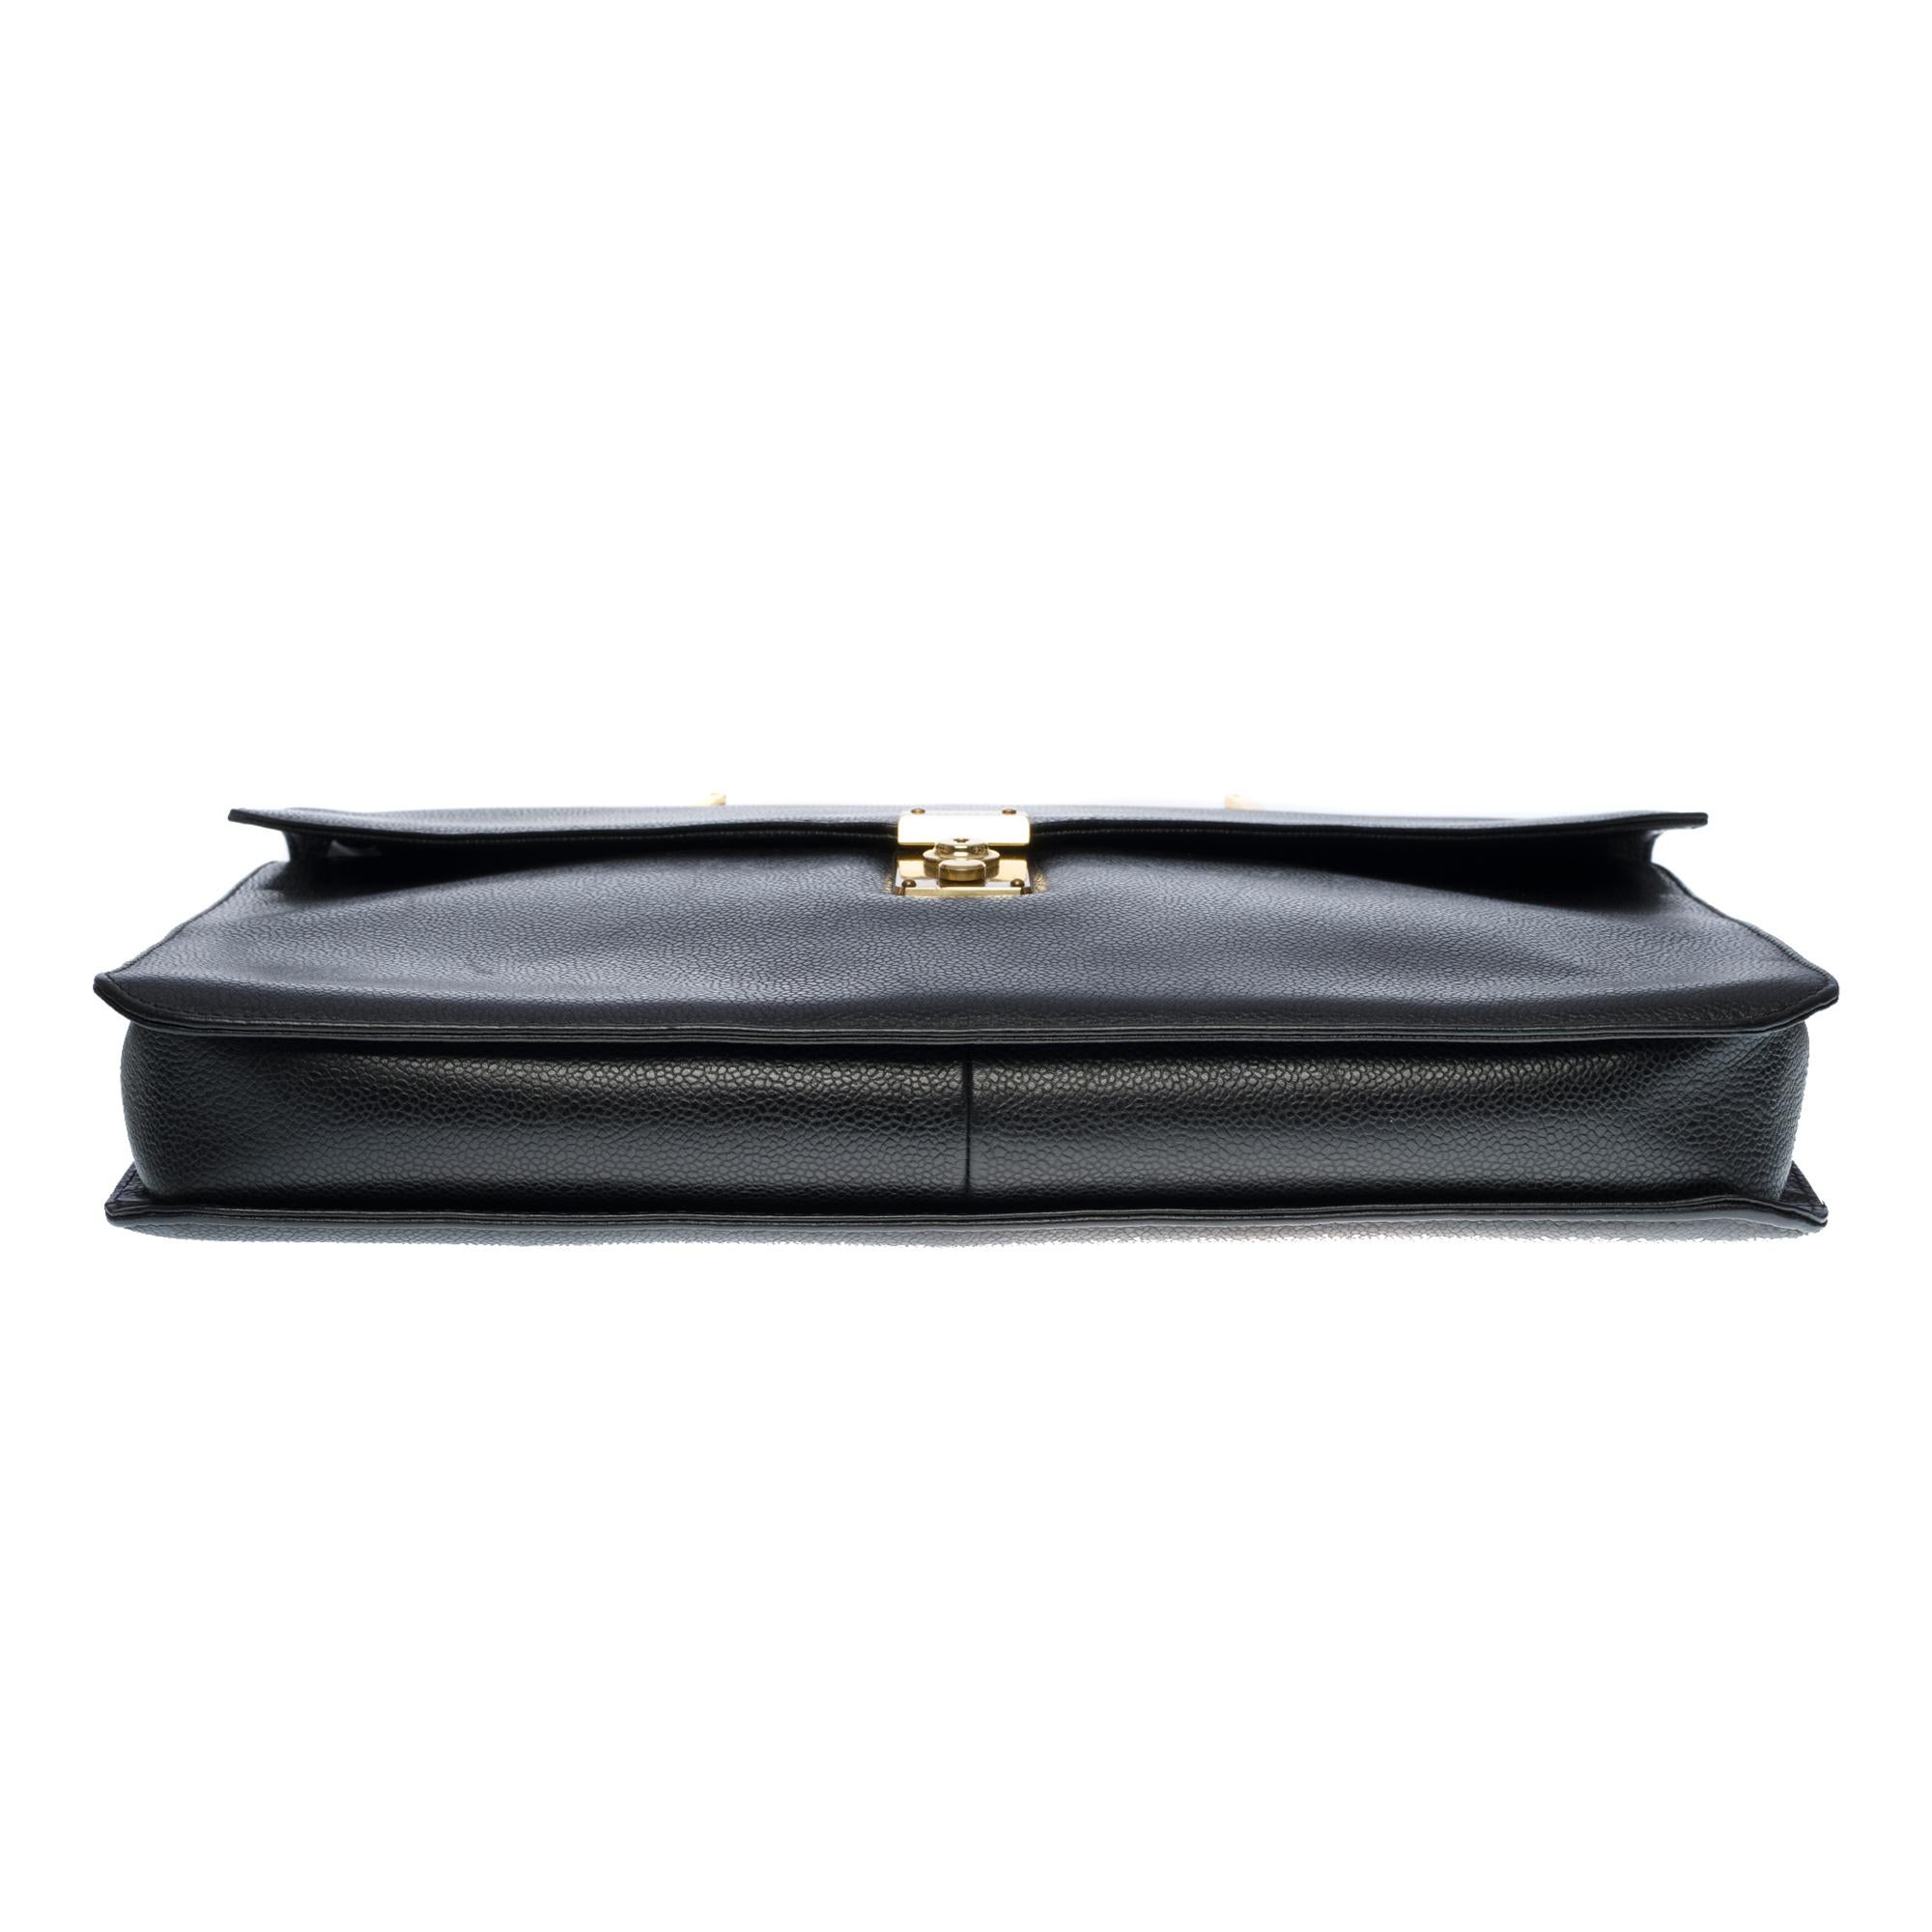 Chanel vintage Briefcase in black grained leather, GHW 3